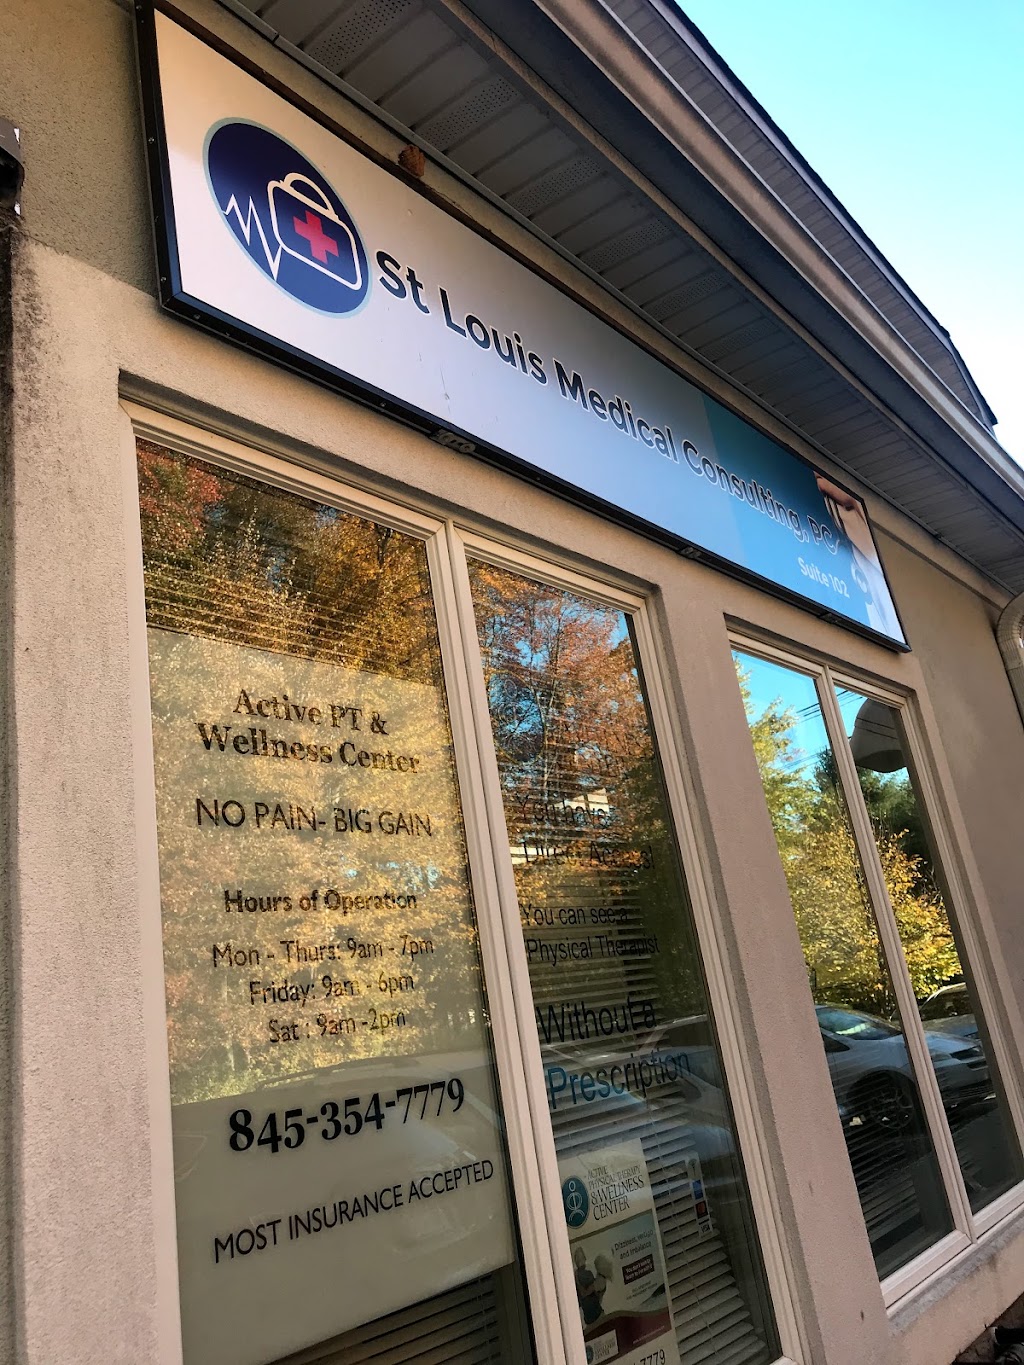 Rockland Recovery Physical Therapy | 873 N Main St Suite 102, Spring Valley, NY 10977 | Phone: (845) 354-7779